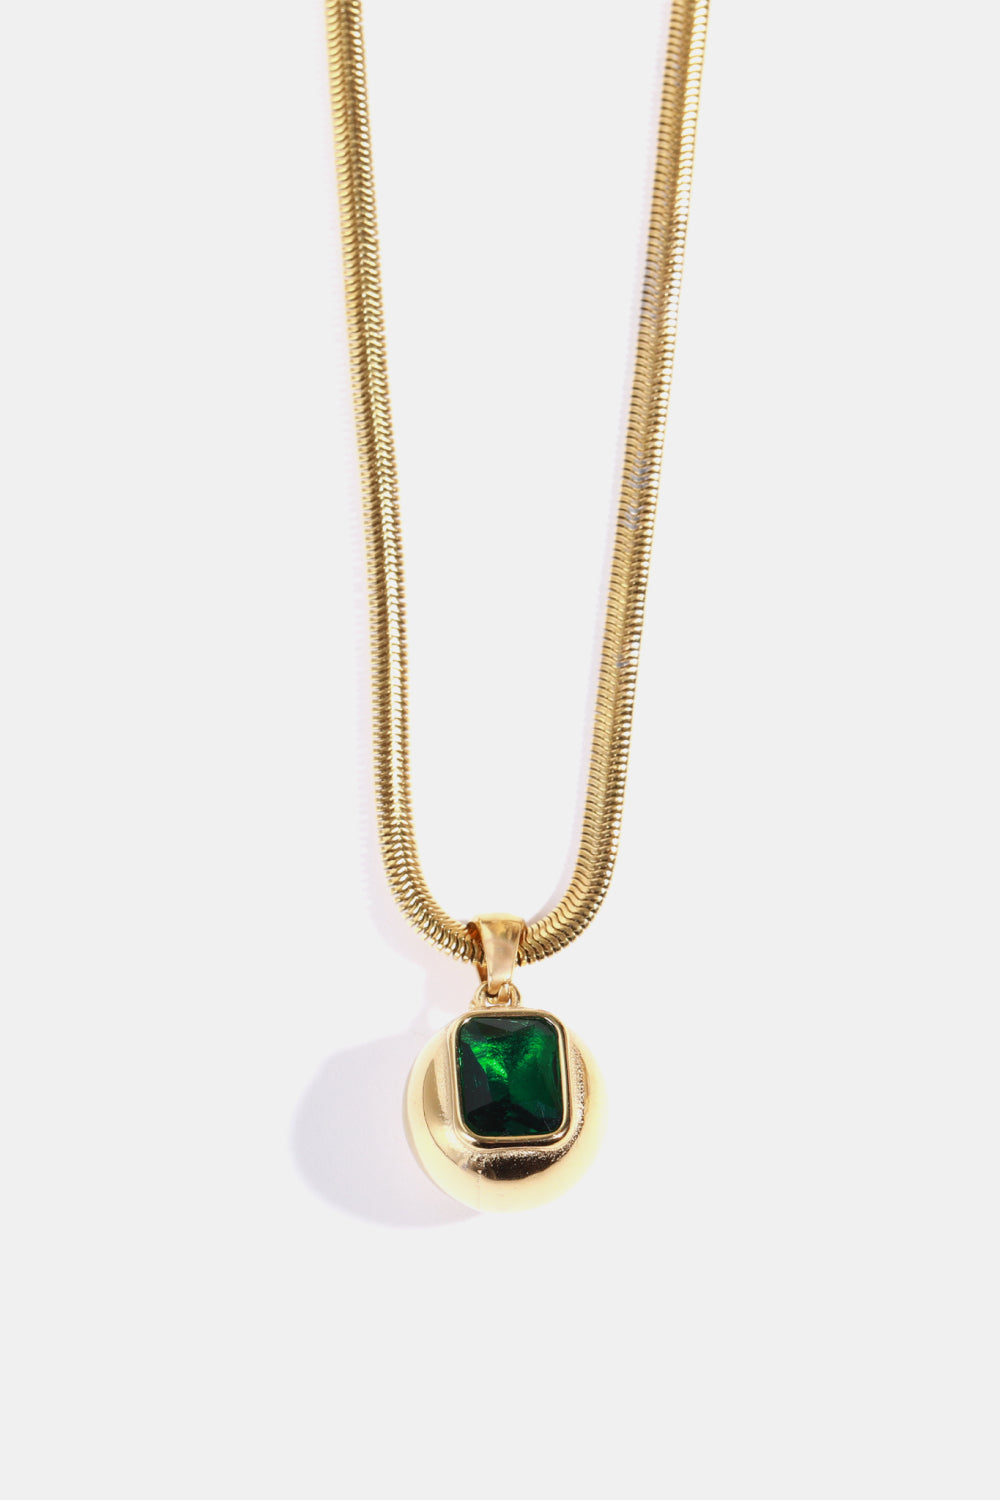 Trendsi Cupid Beauty Supplies Green / One Size Women Necklace Zircon 18K Gold-Plated Geometrical Shape Pendant Necklace